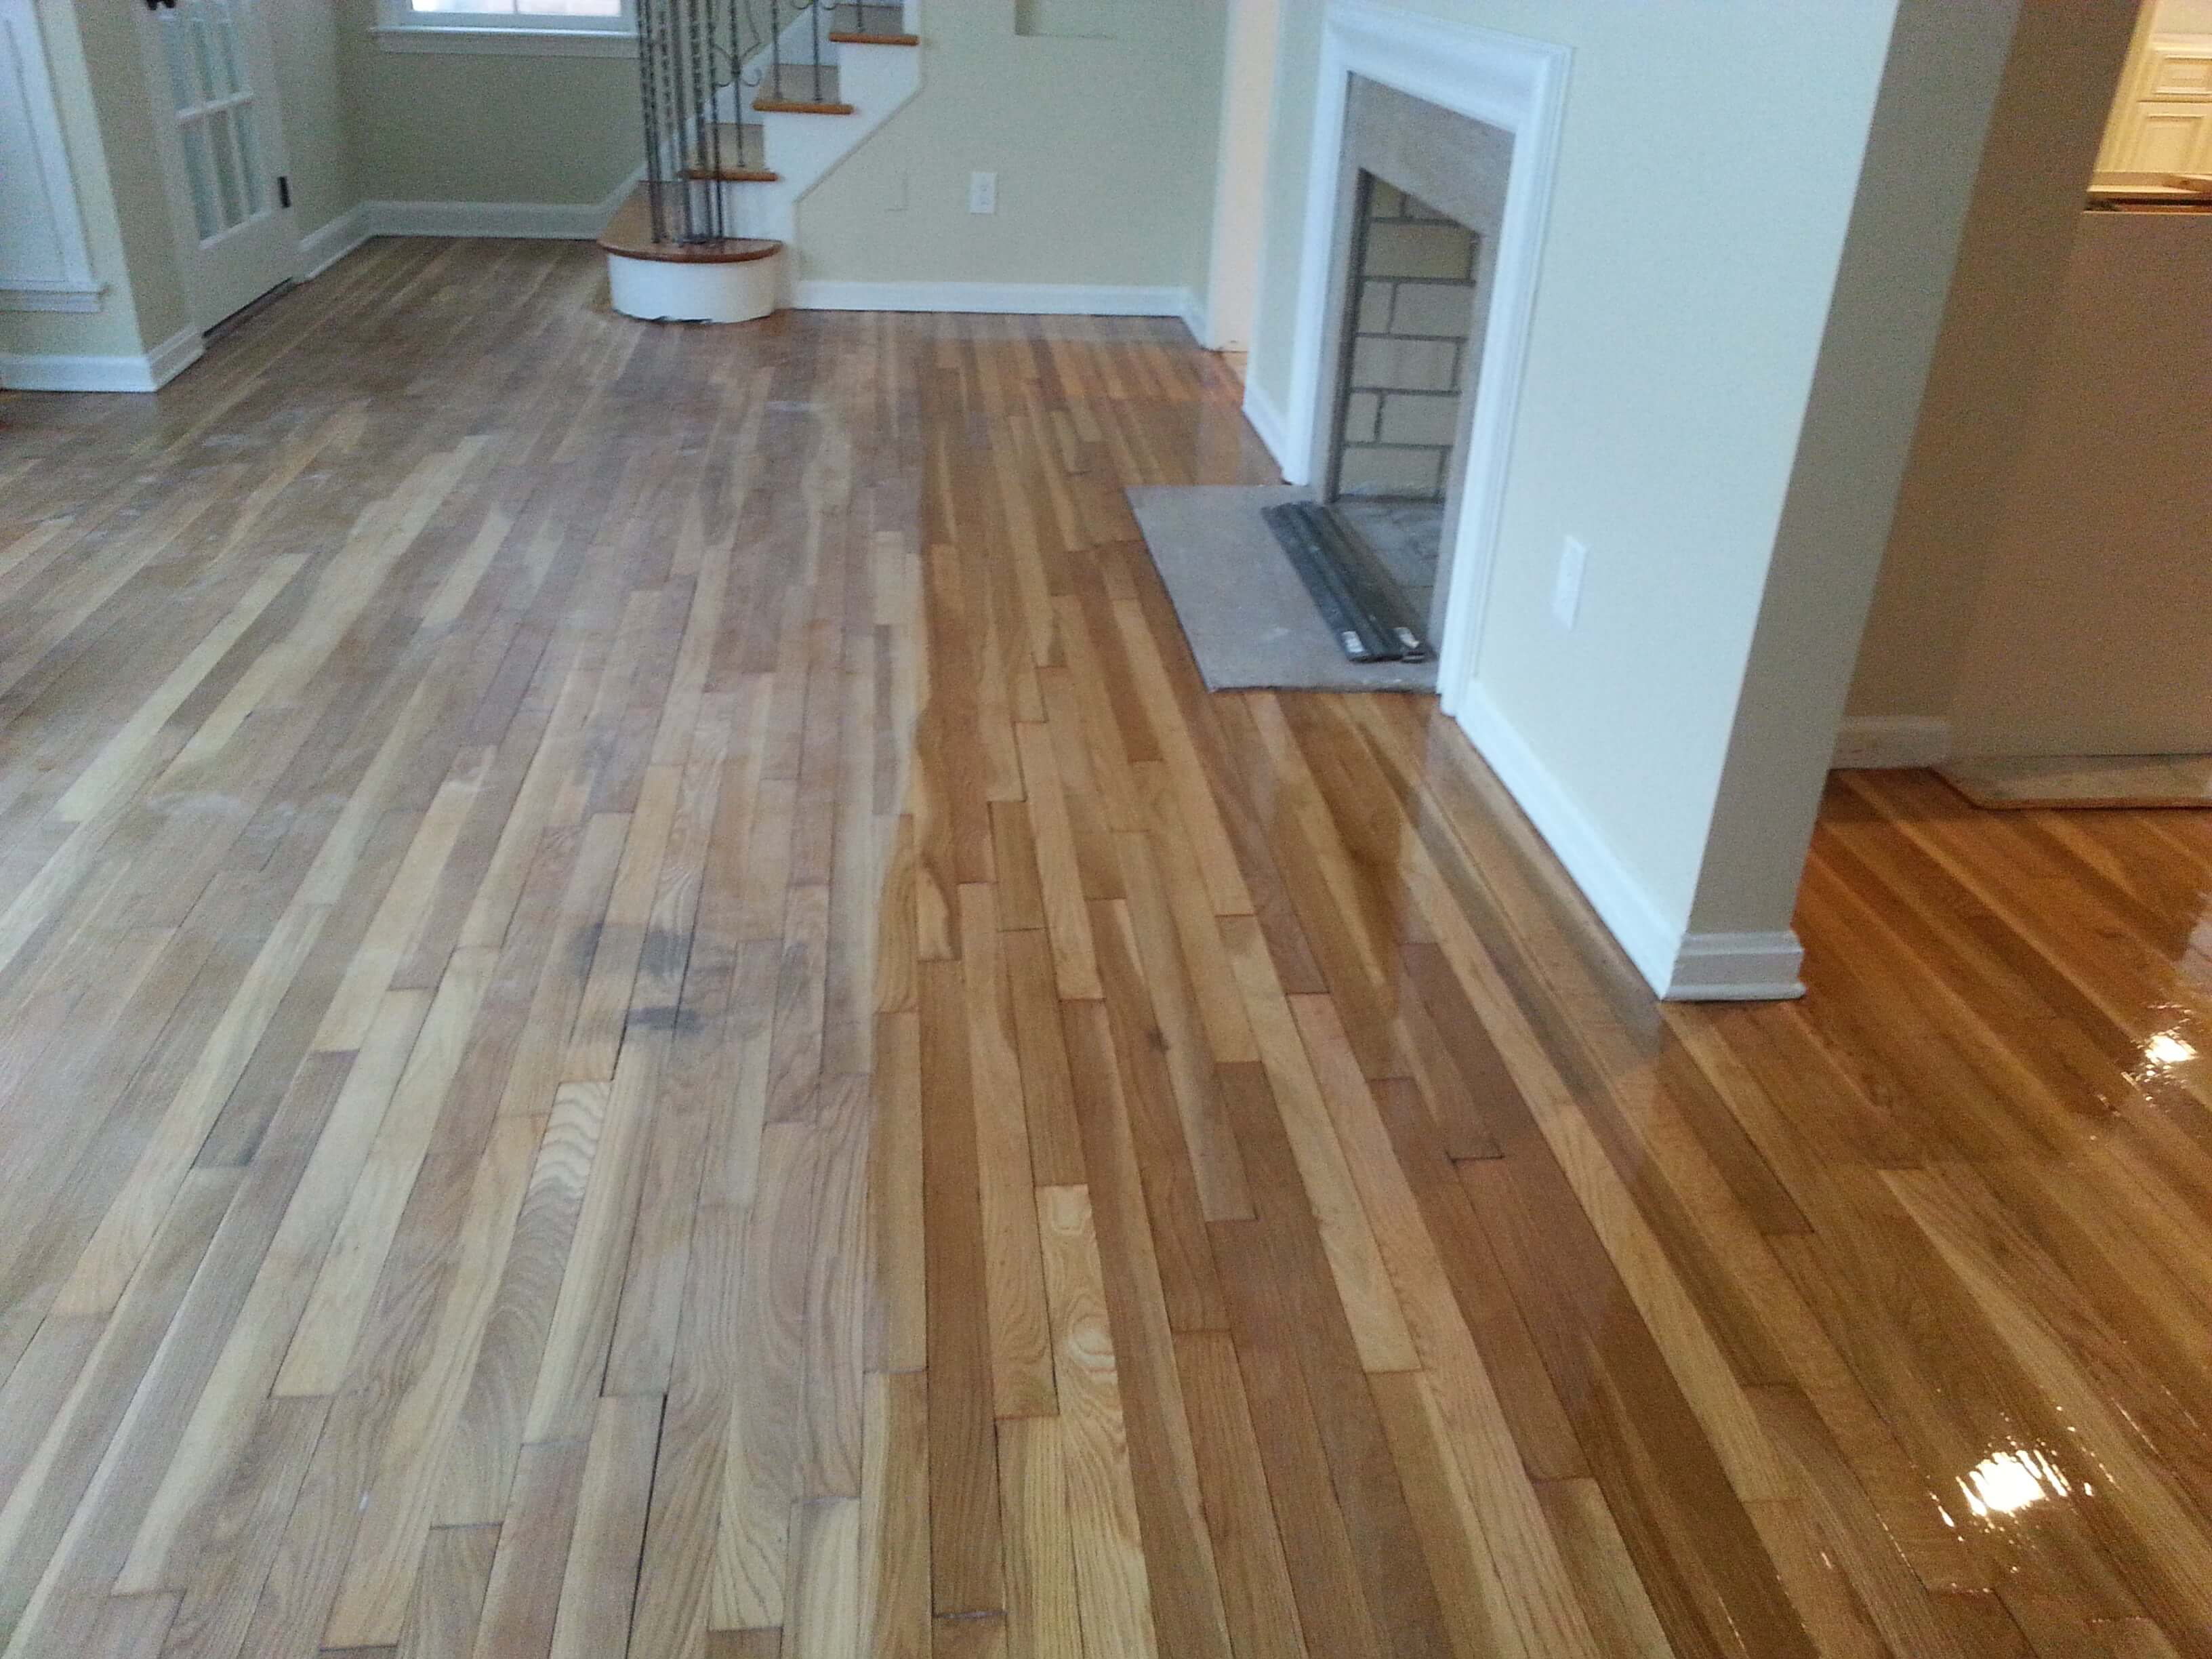 Hardwood Floor Refinishing Fabulous, How Much Does It Cost To Get Hardwood Floors Refinished